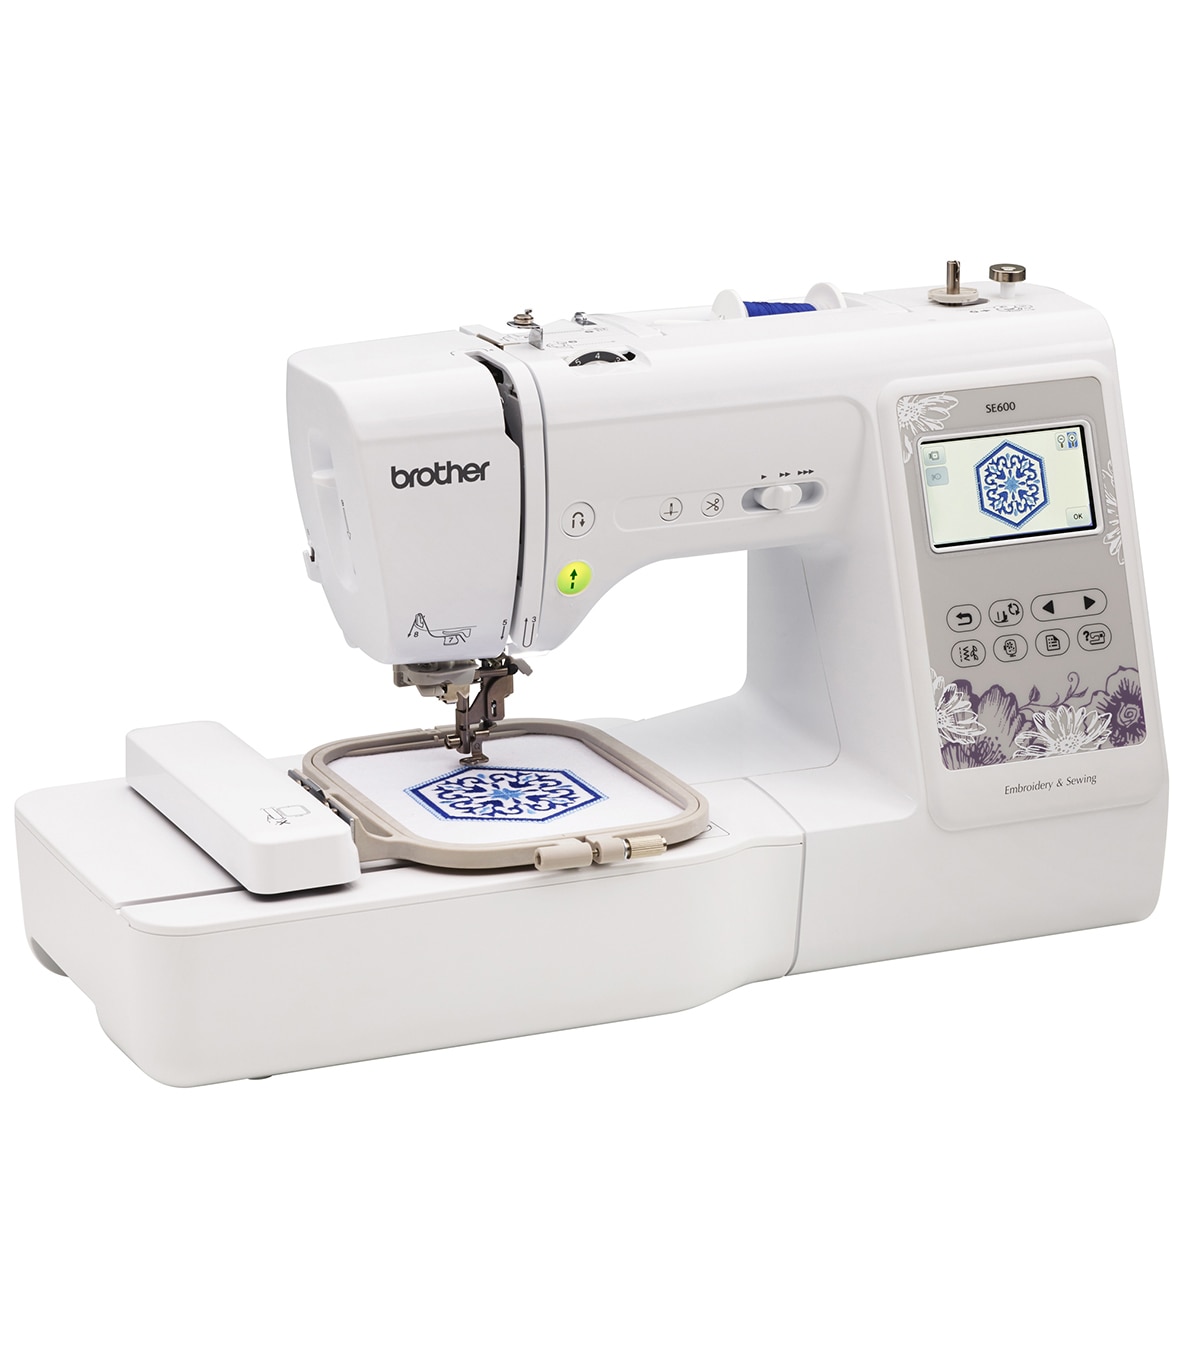 Brother SE600 2in1 Sewing & Embroidery Machine JOANN